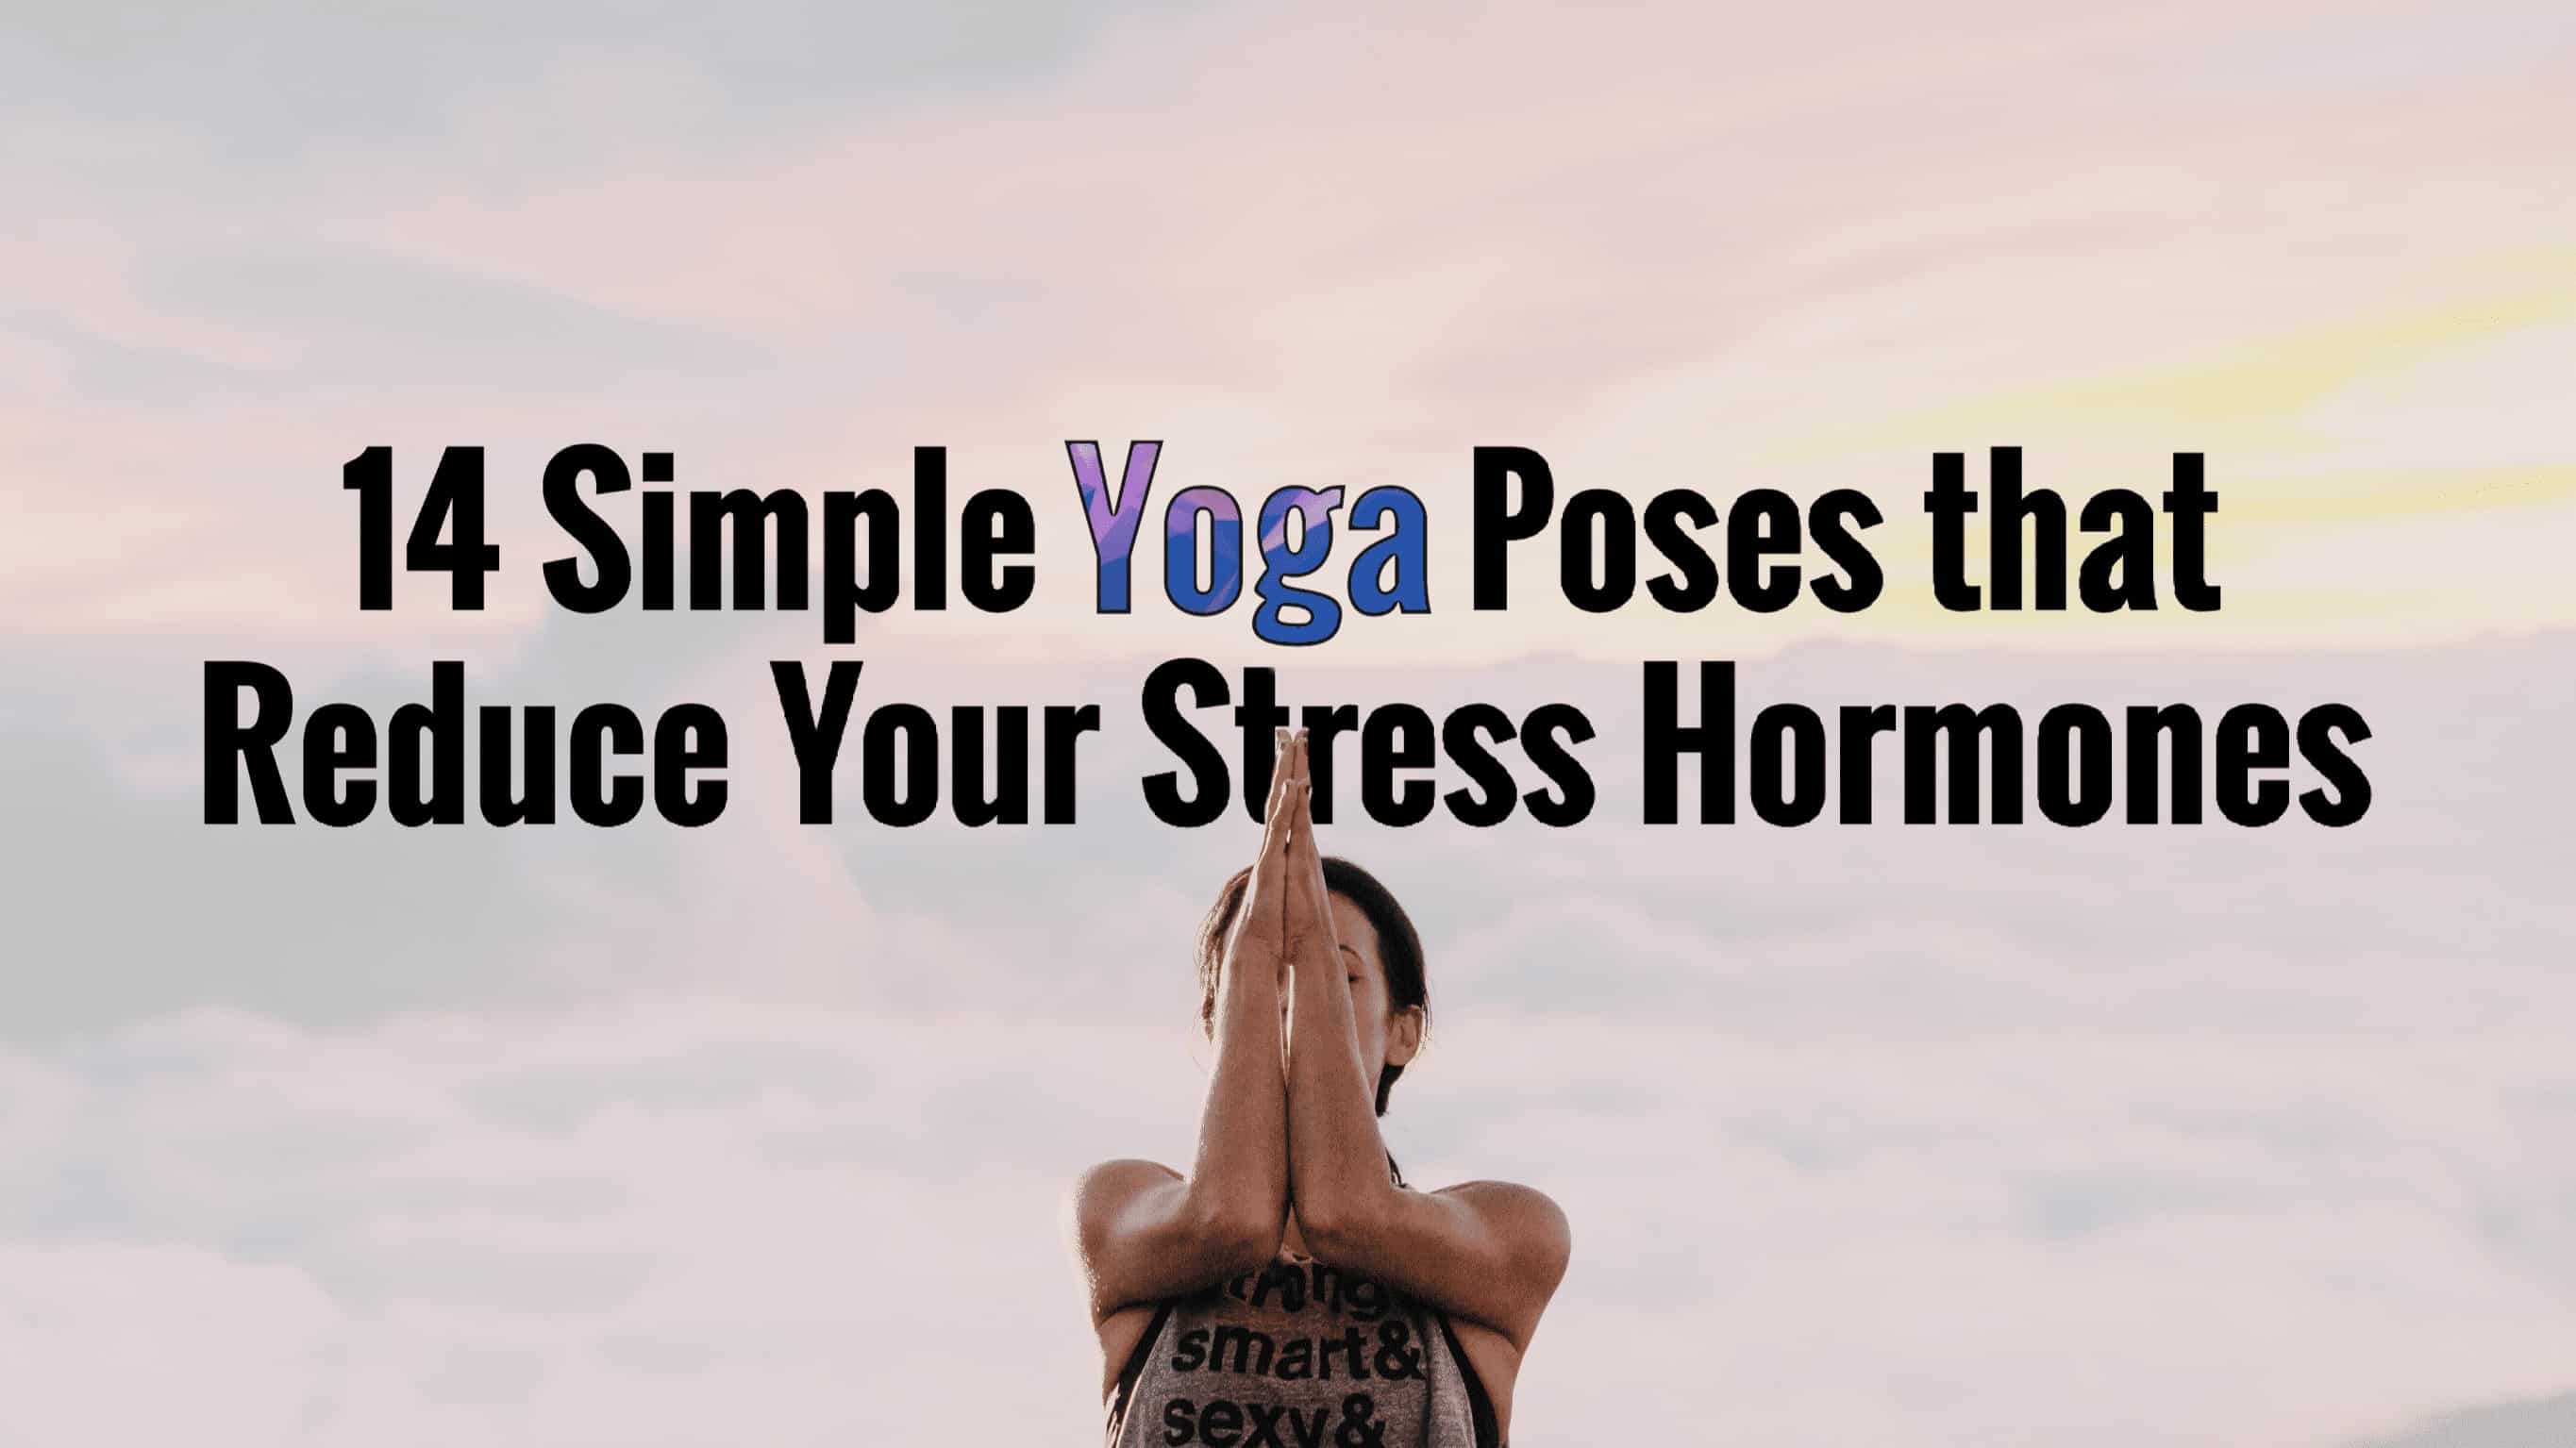 These Simple Yoga Poses Reduce Your Stress Hormones